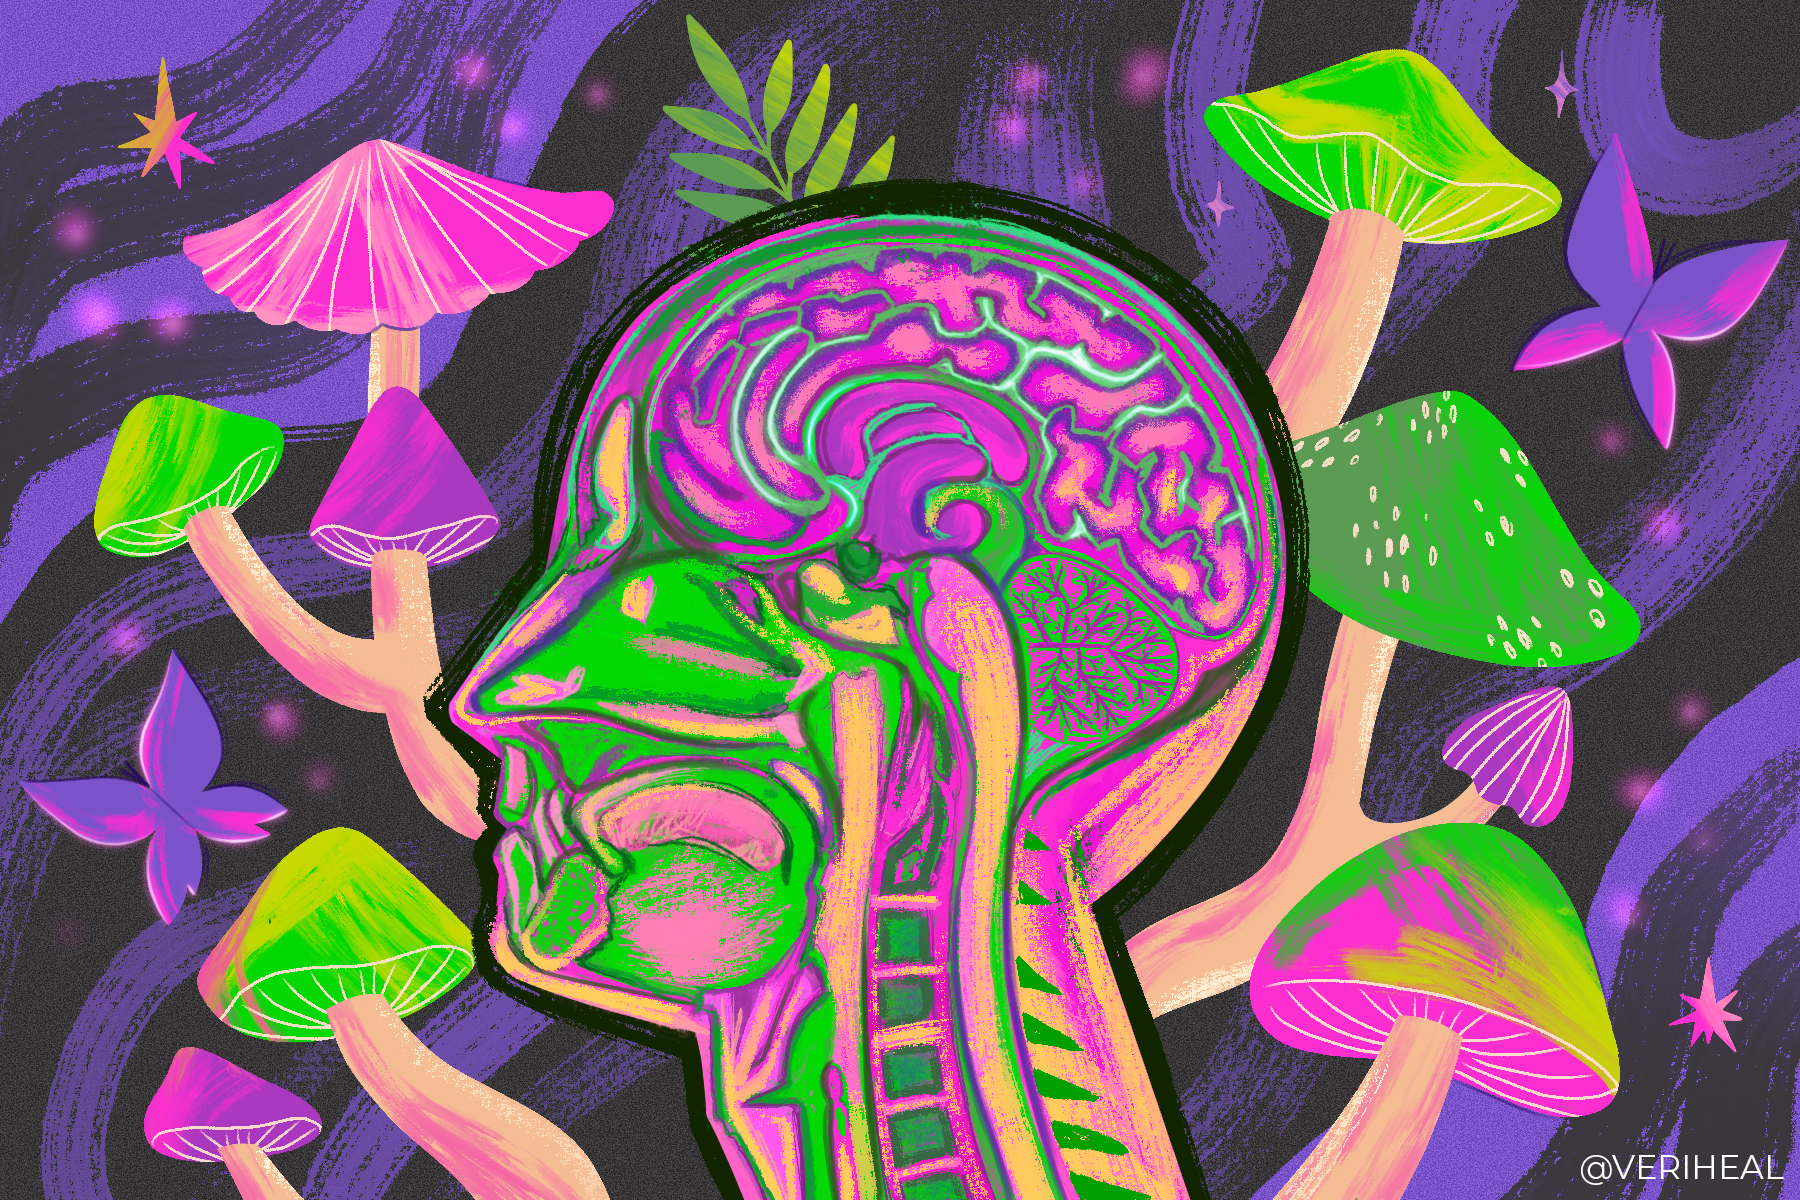 New Trial Suggests Powerful Psilocybin May Ease Stress Before MRIs